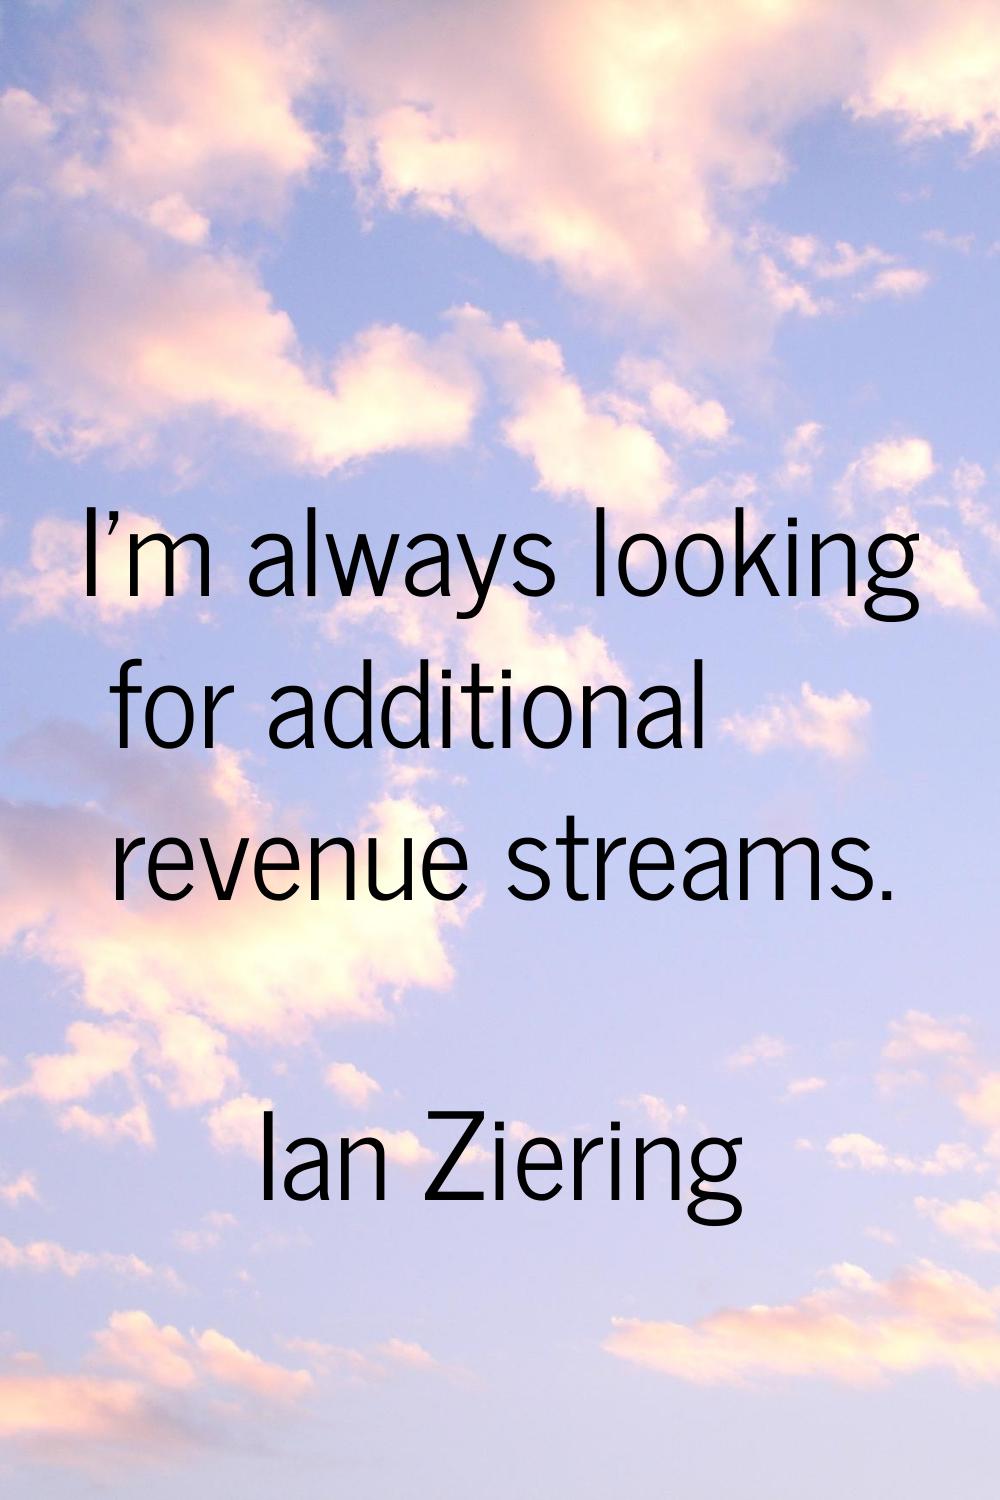 I'm always looking for additional revenue streams.